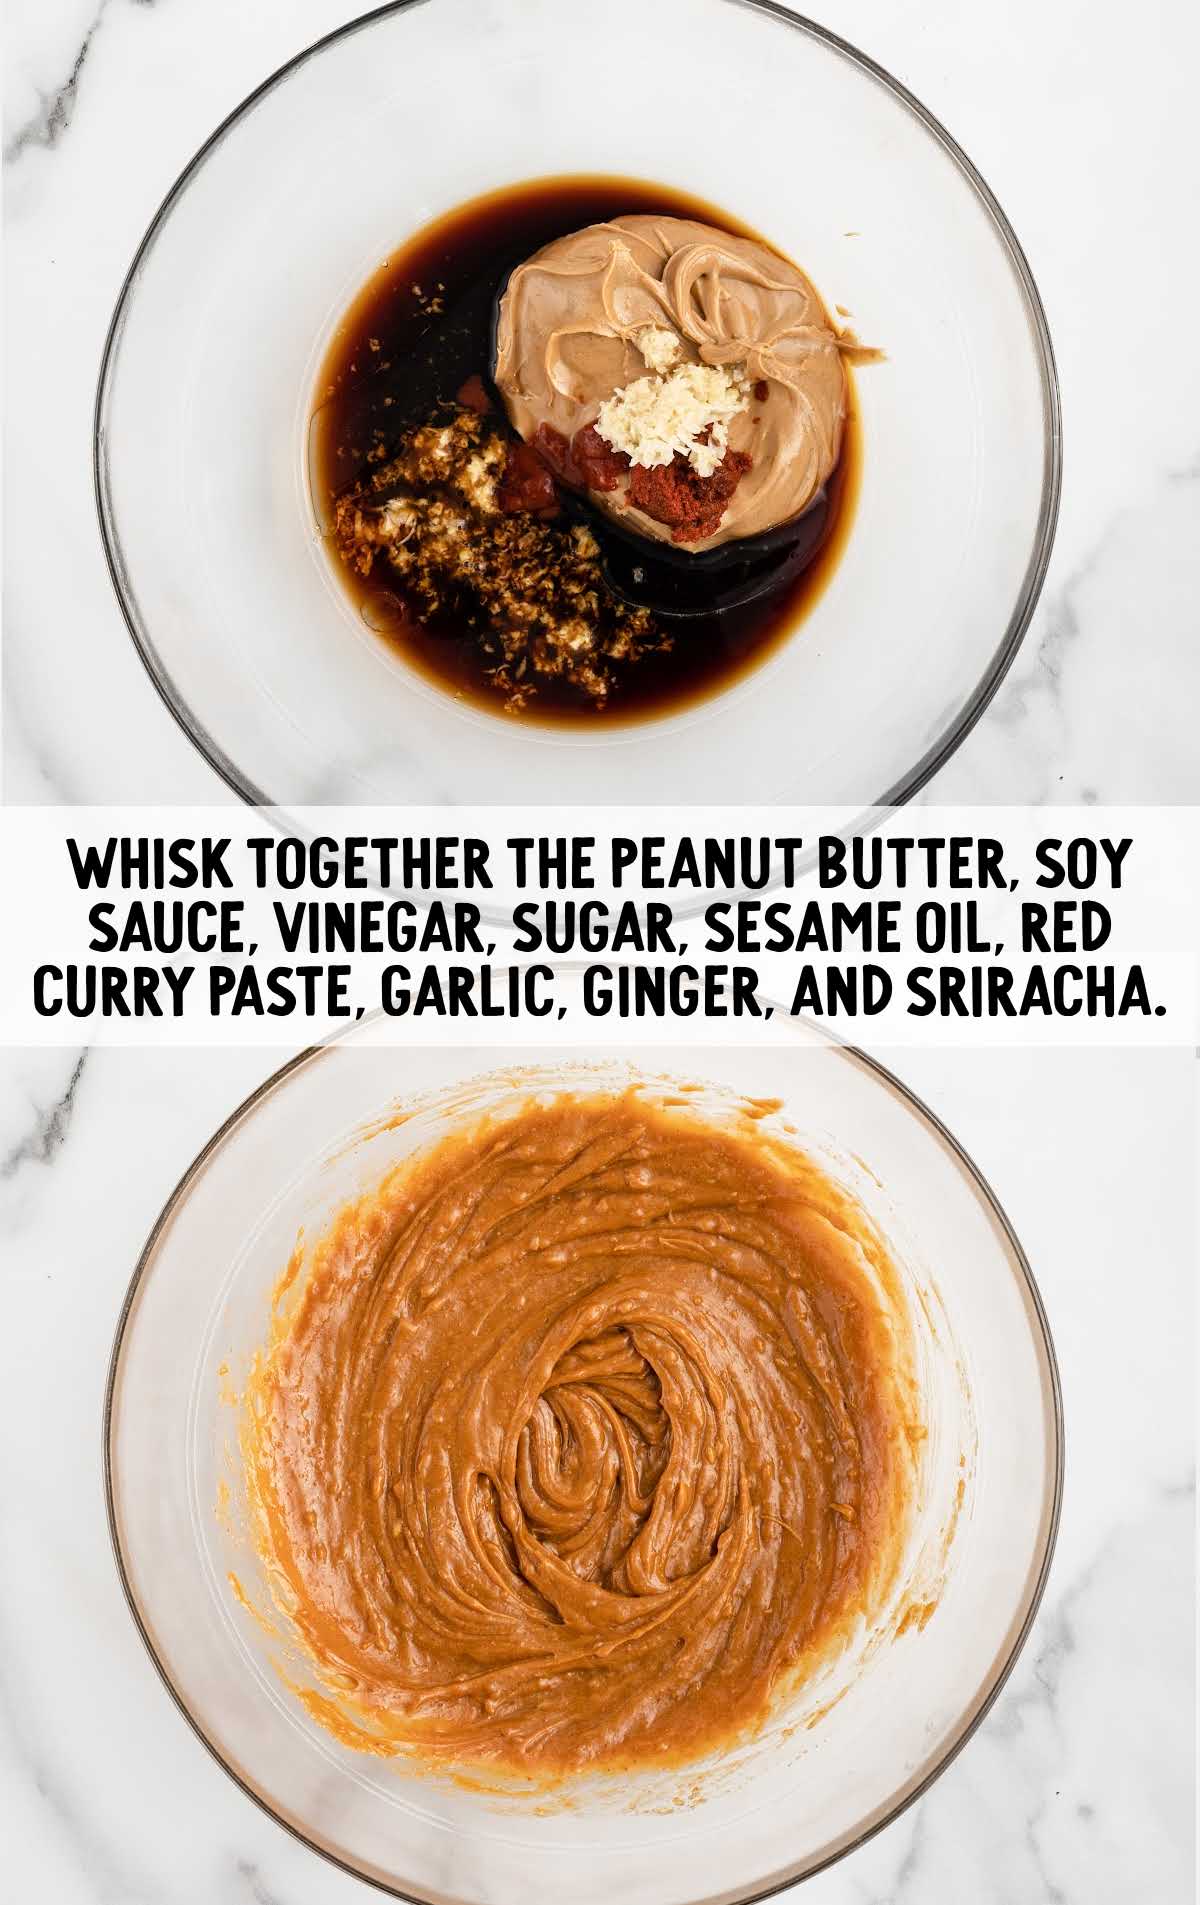 peanut butter, soy sauce, vinegar, sugar, seasame oil, red curry paste, garlic, ginger and sriracha whisked together